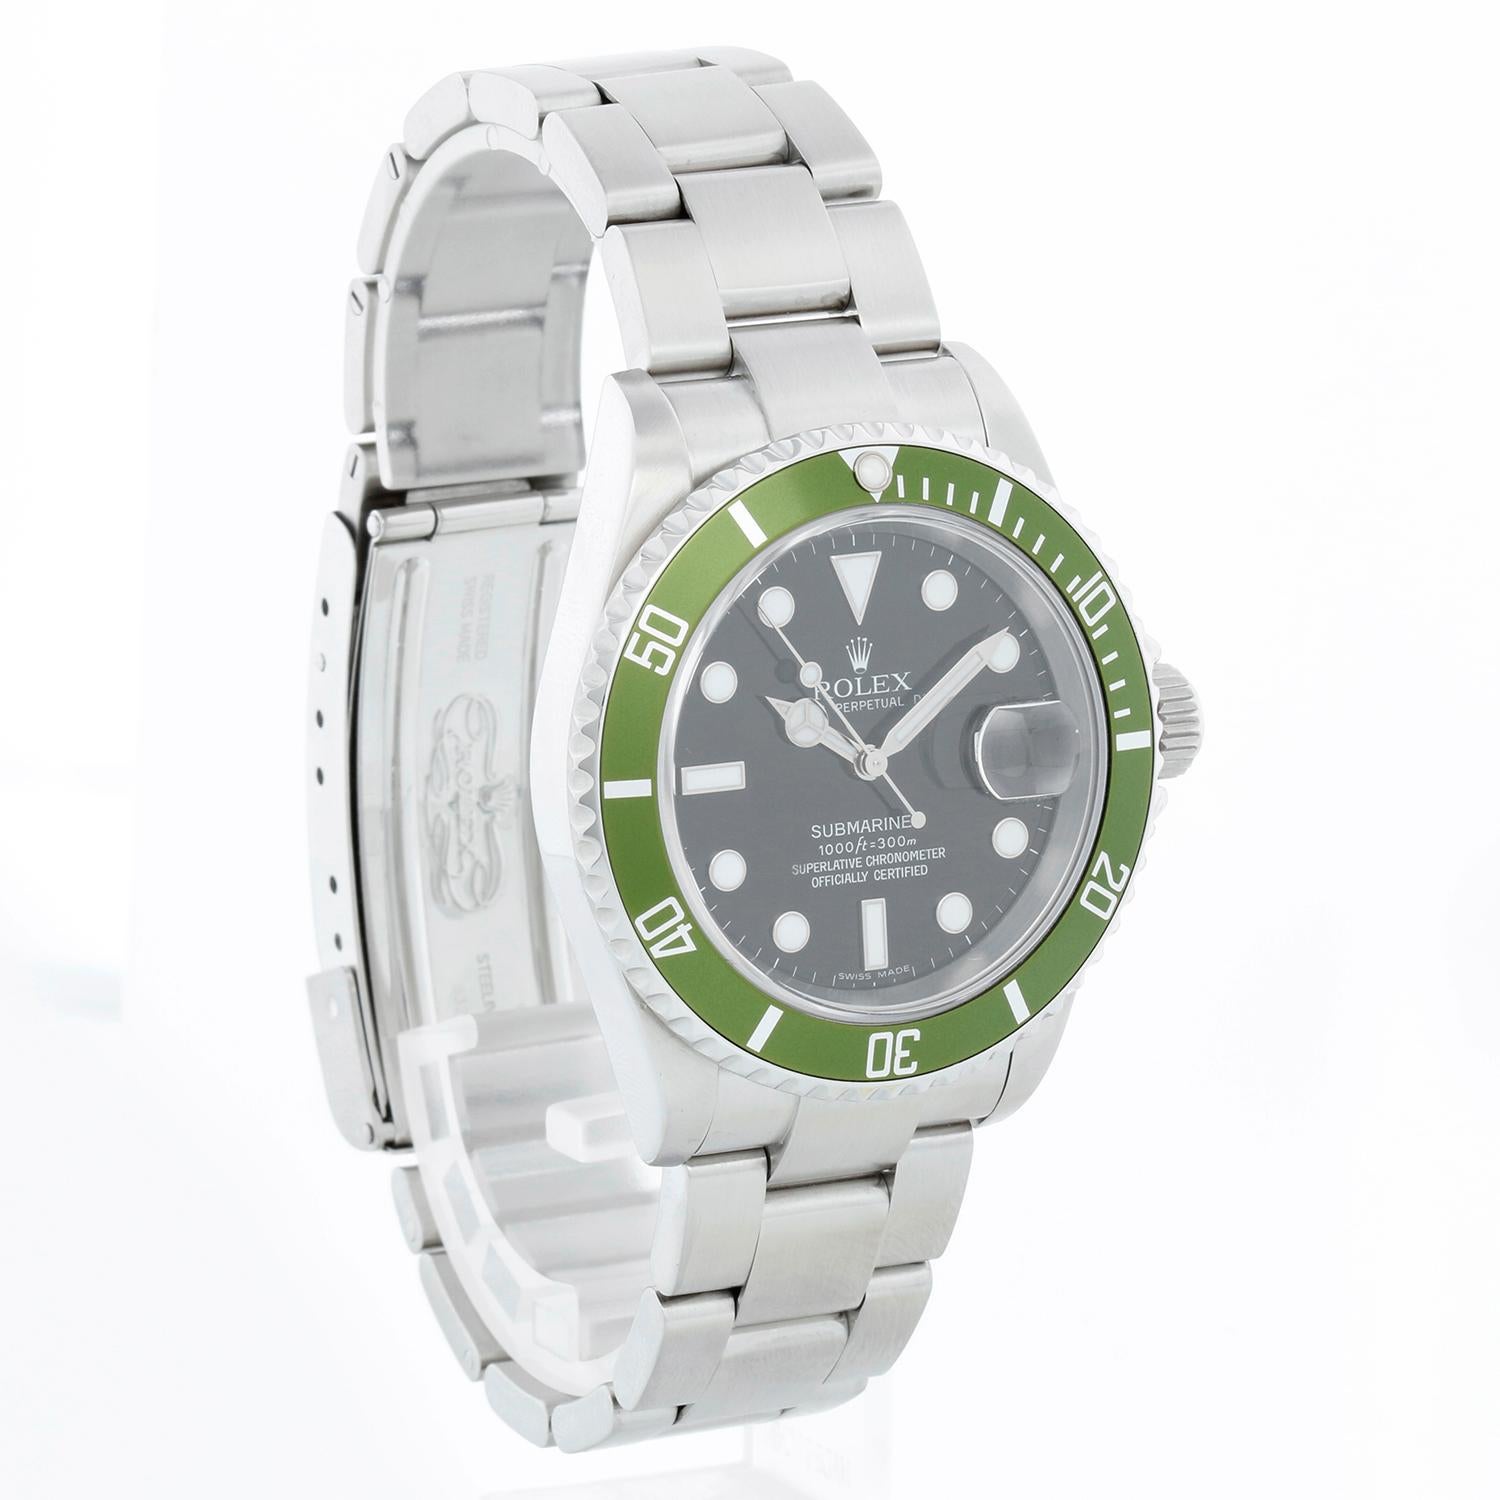 Rolex Kermit Submariner Men's  Stainless Steel Watch 16610 - Automatic winding, 31 jewels, pressure proof to 1,000 feet. Stainless steel case with time-lapse Cerachrom bezel . Black dial with luminous markers; date at 3 o'clock, green bezel.